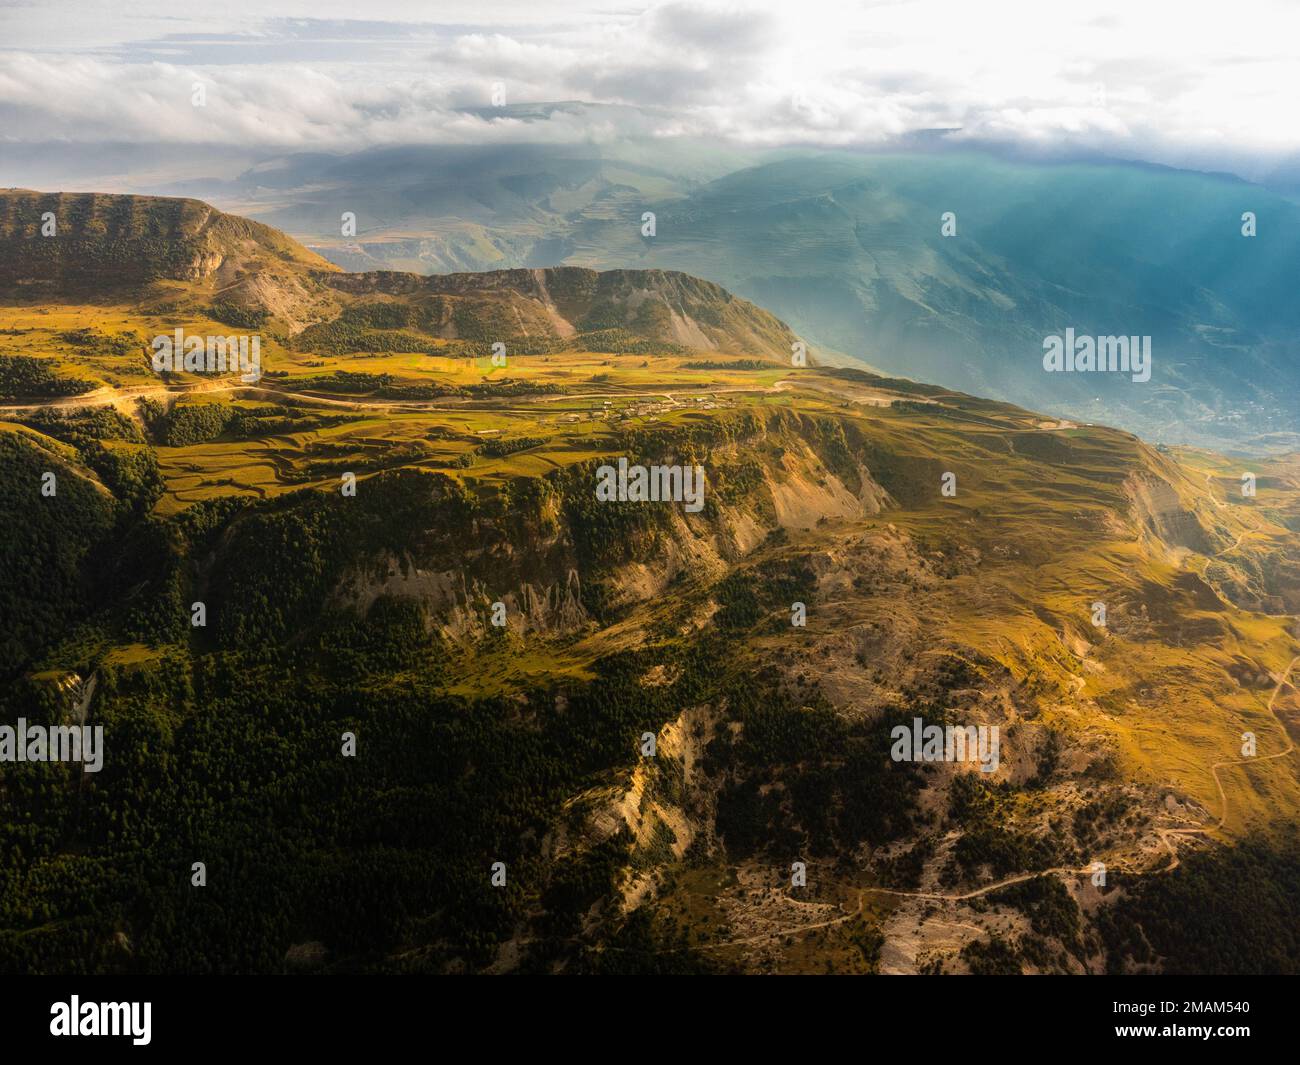 Stunning landscape with Khunzakh Canyon in the Republic of Dagestan, Russia Stock Photo